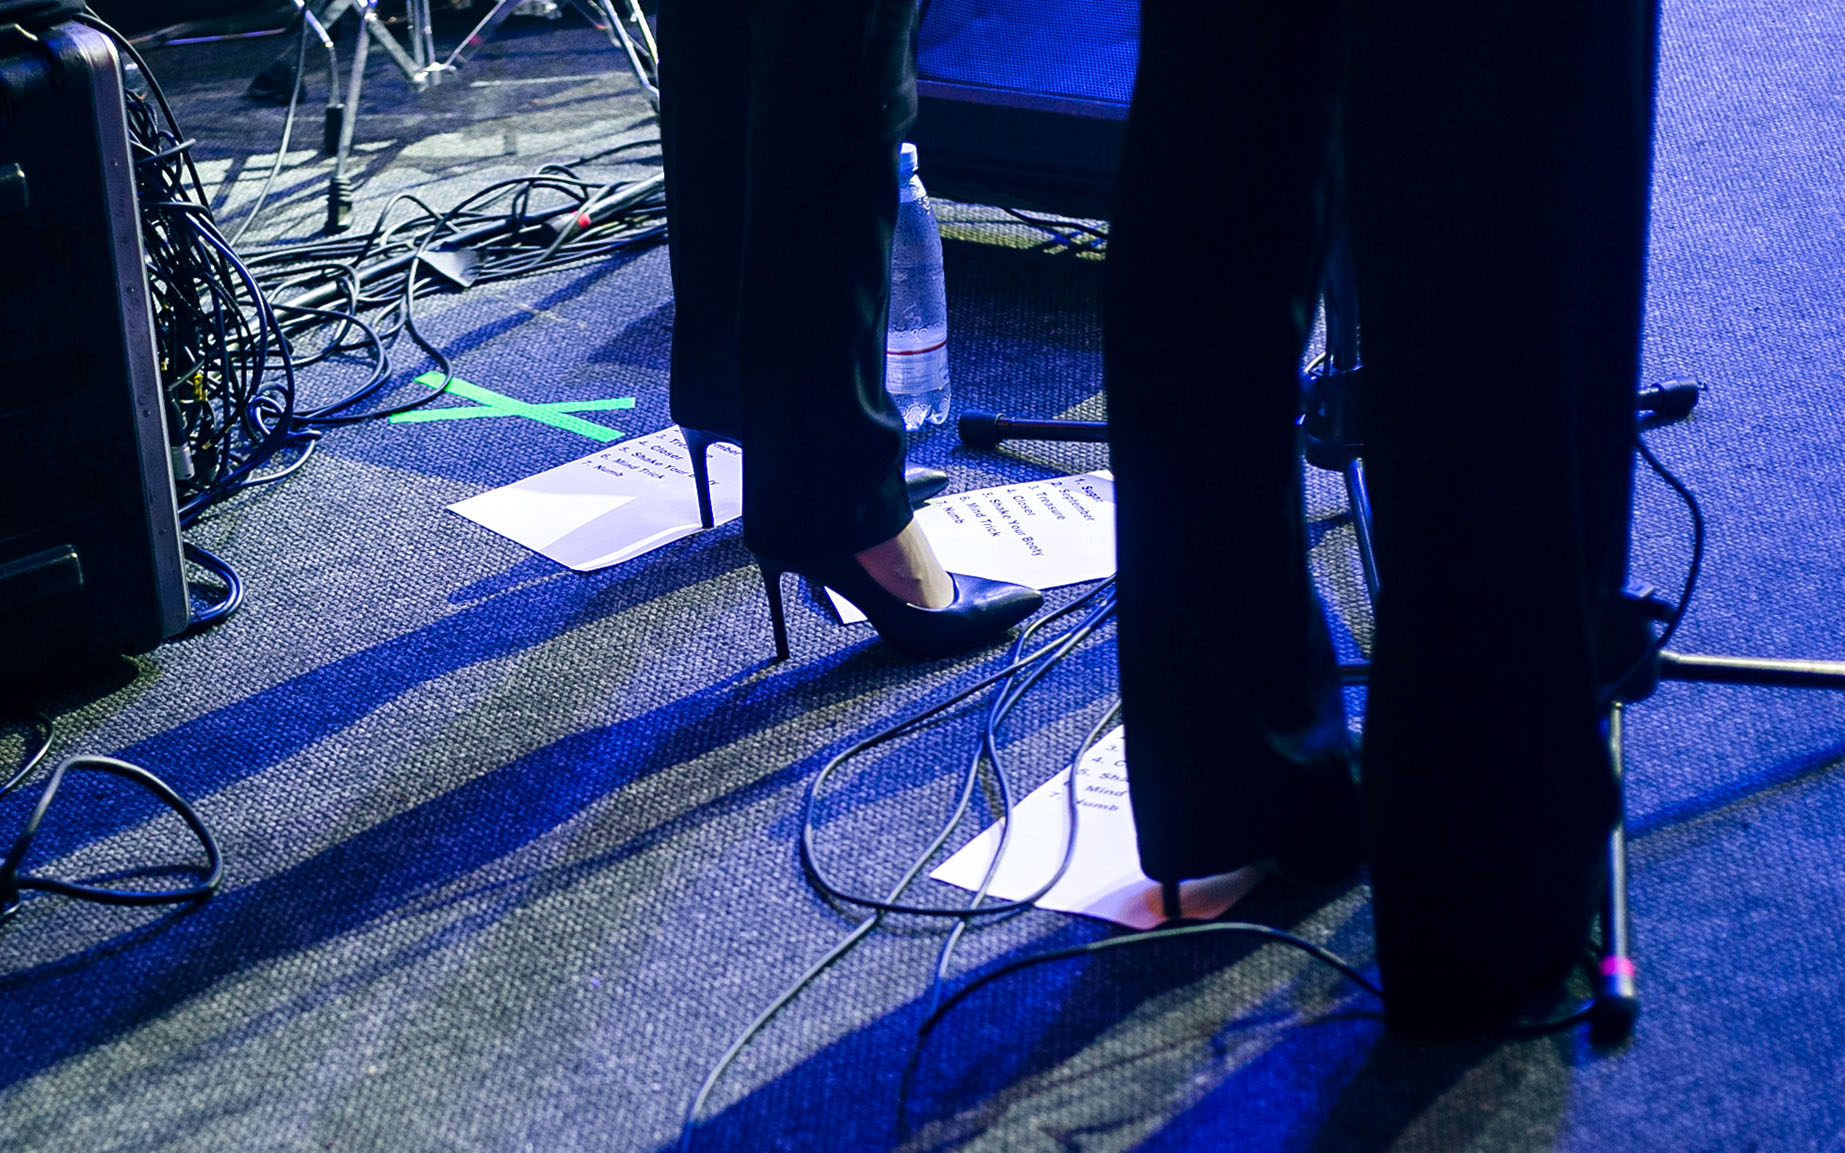 Two musicians standing on stage with a written setlist at their feet